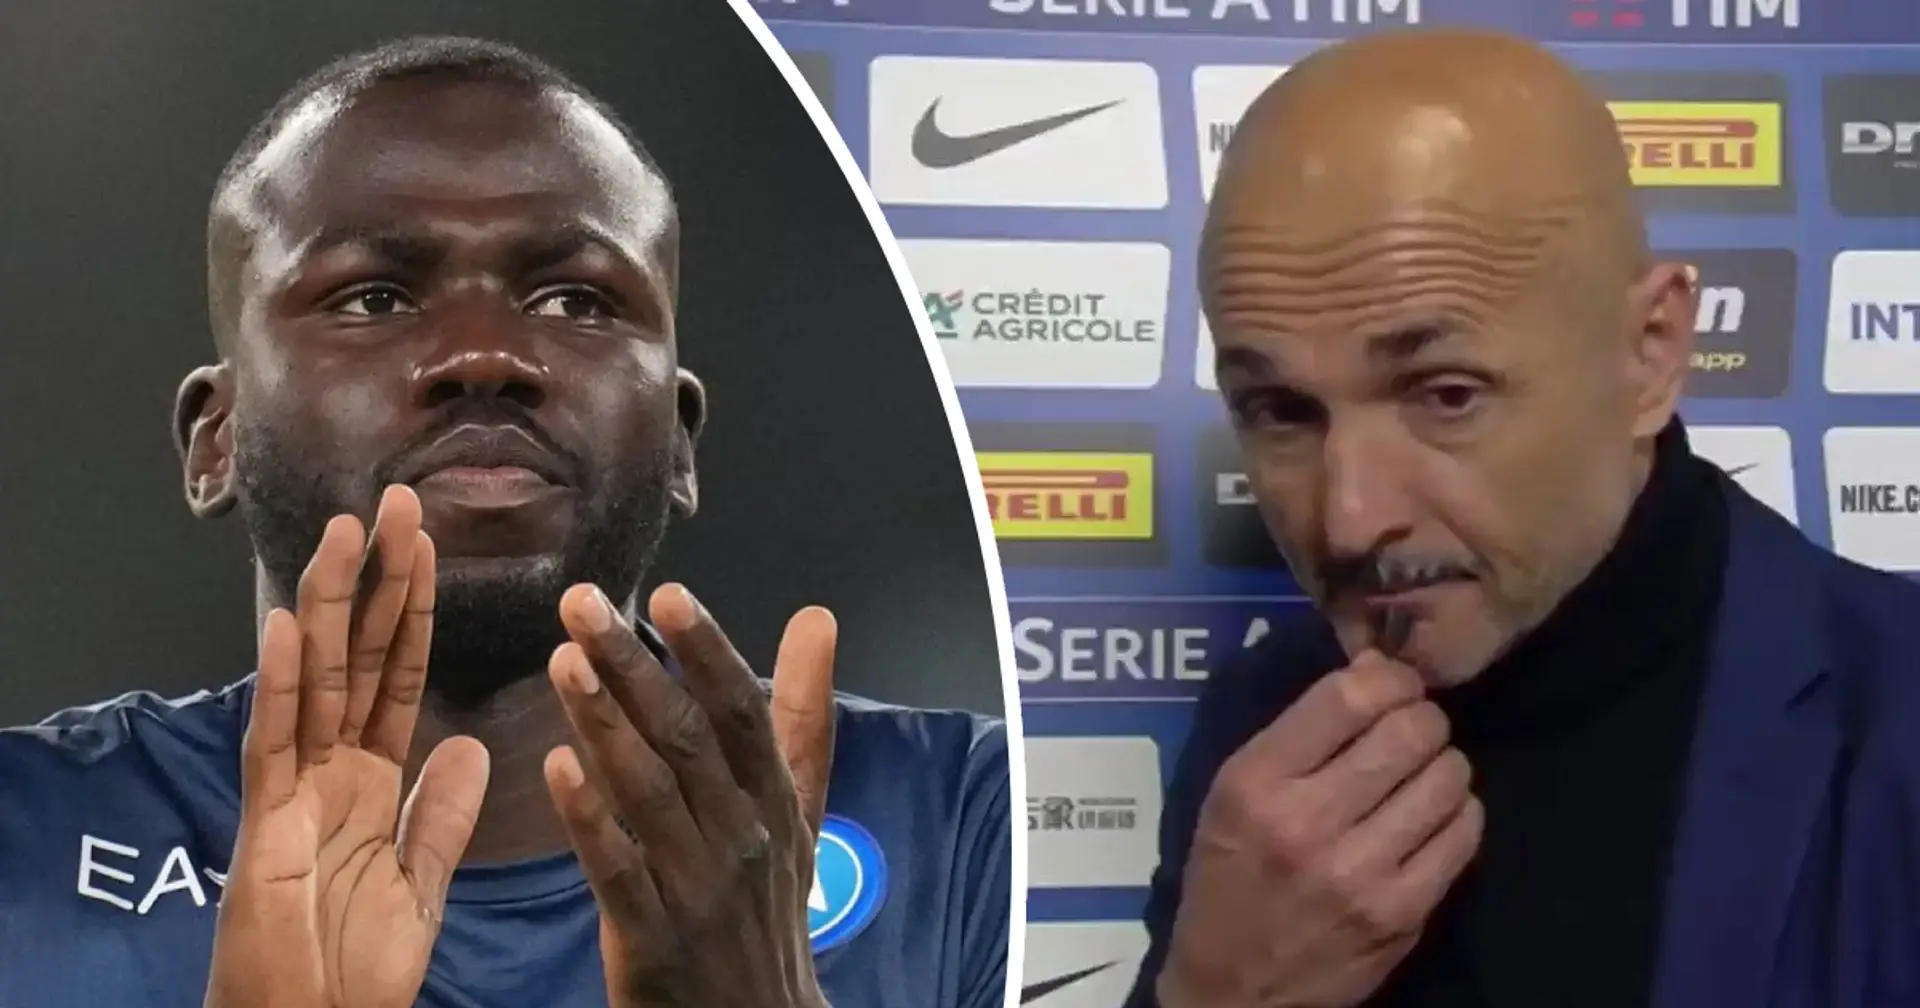 Napoli manager says he'll 'chain himself to the gates' if Koulibaly sold